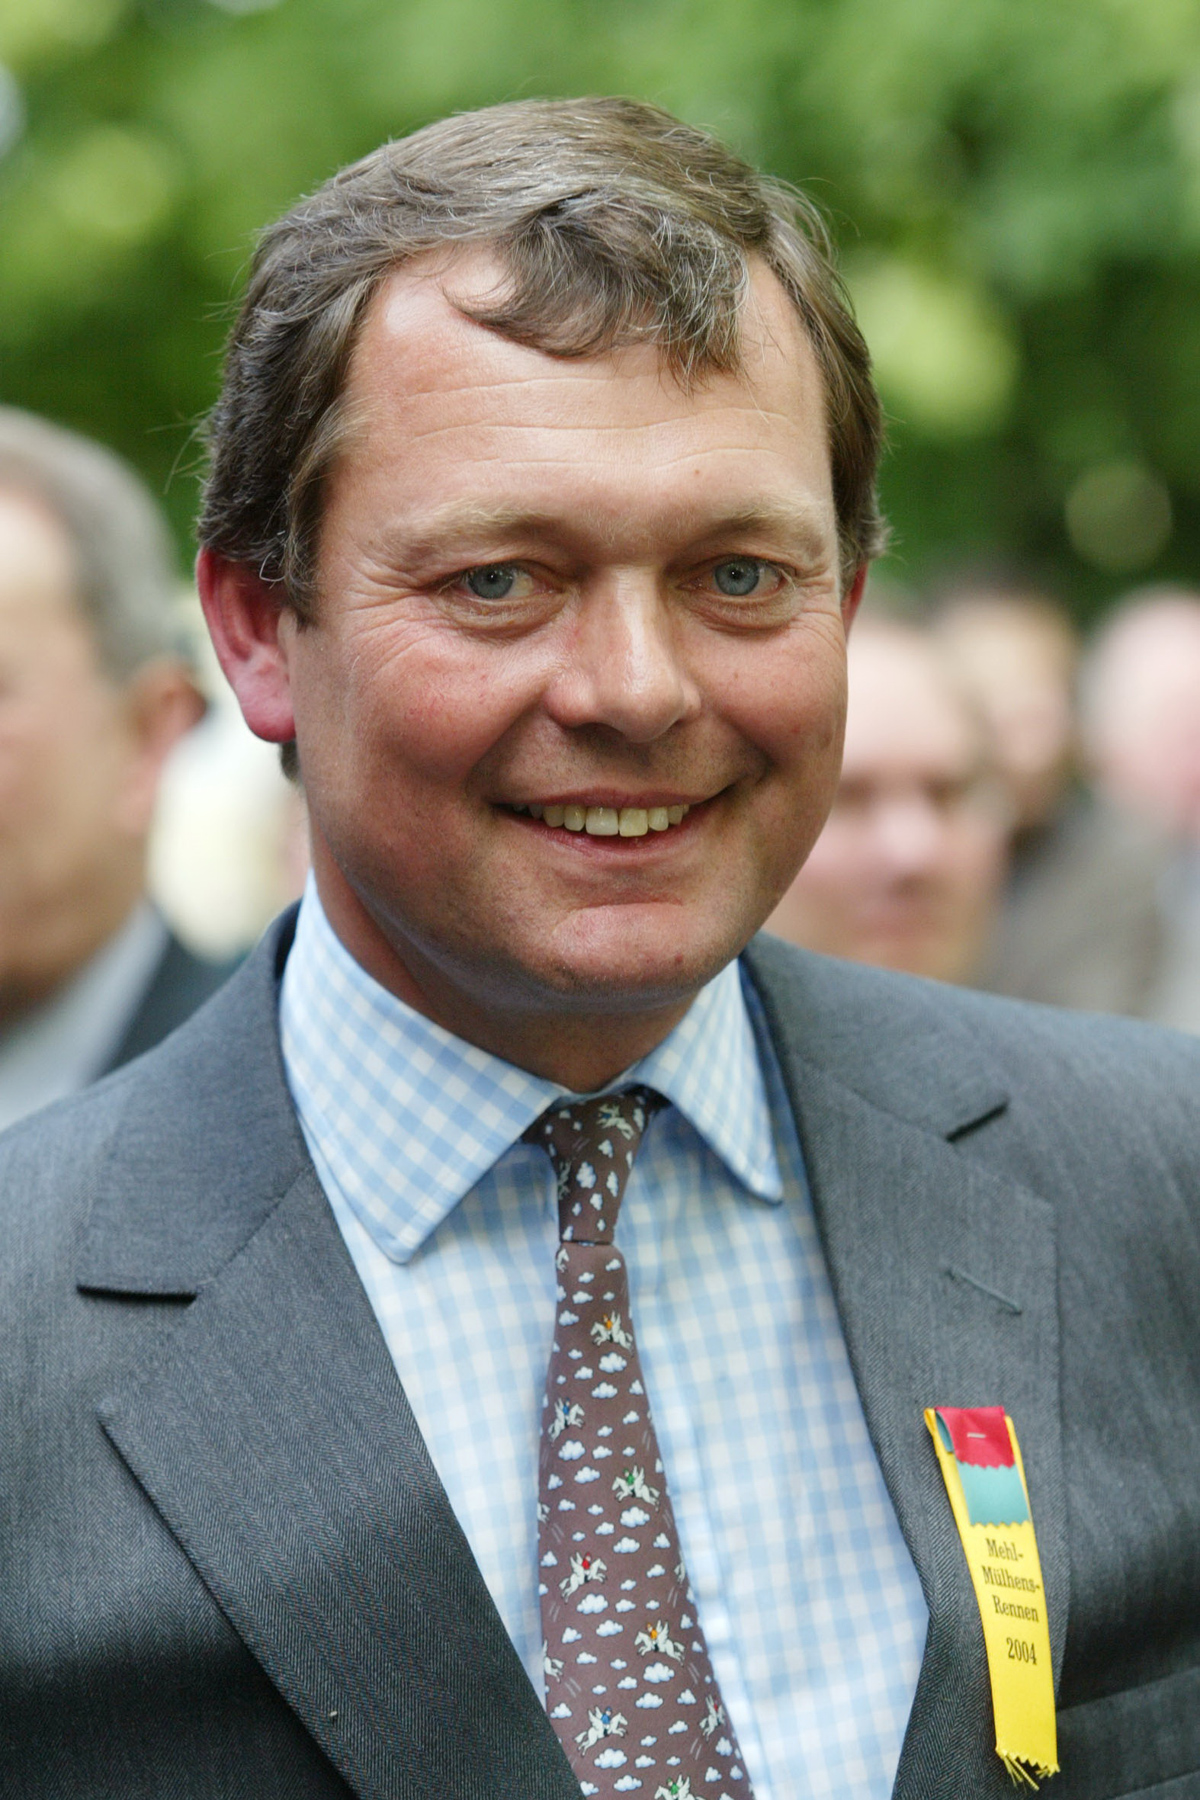 Newmarket trainer William Haggas saddles One Master for the LONGINES Hong Kong Mile.